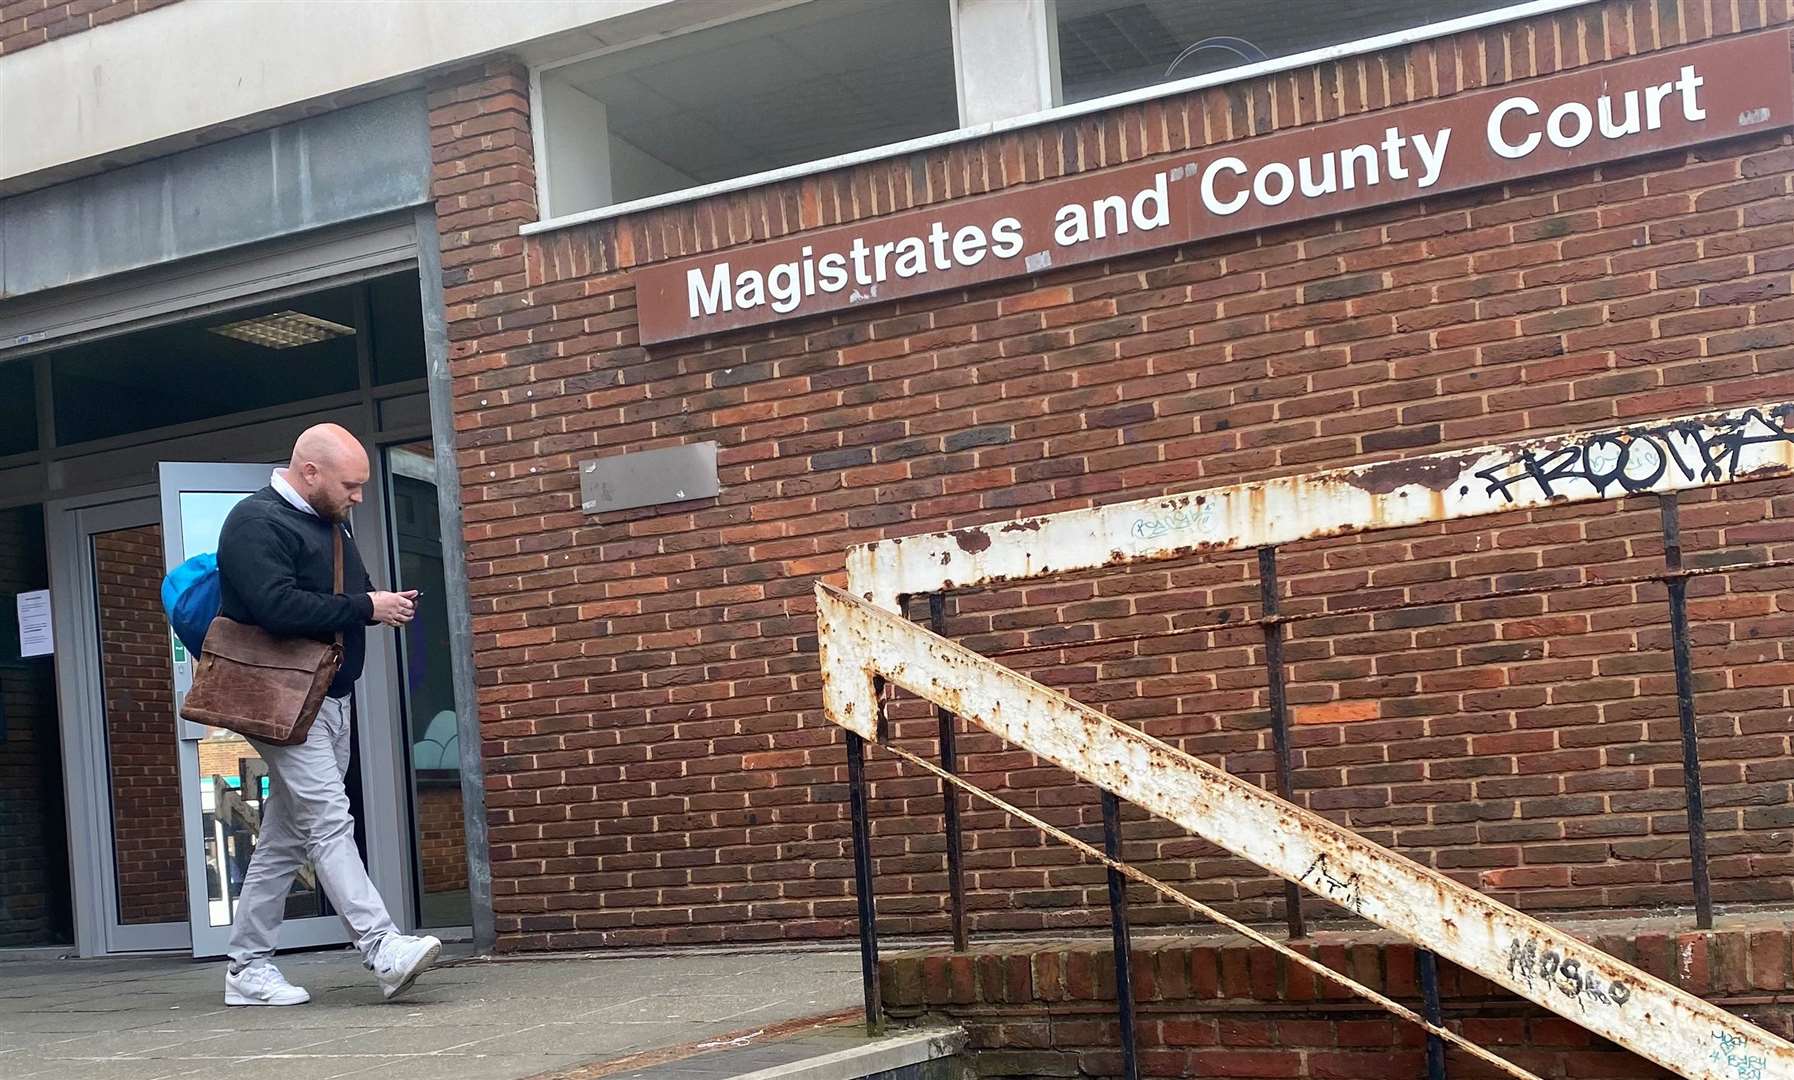 The case was heard at Margate Magistrates Court